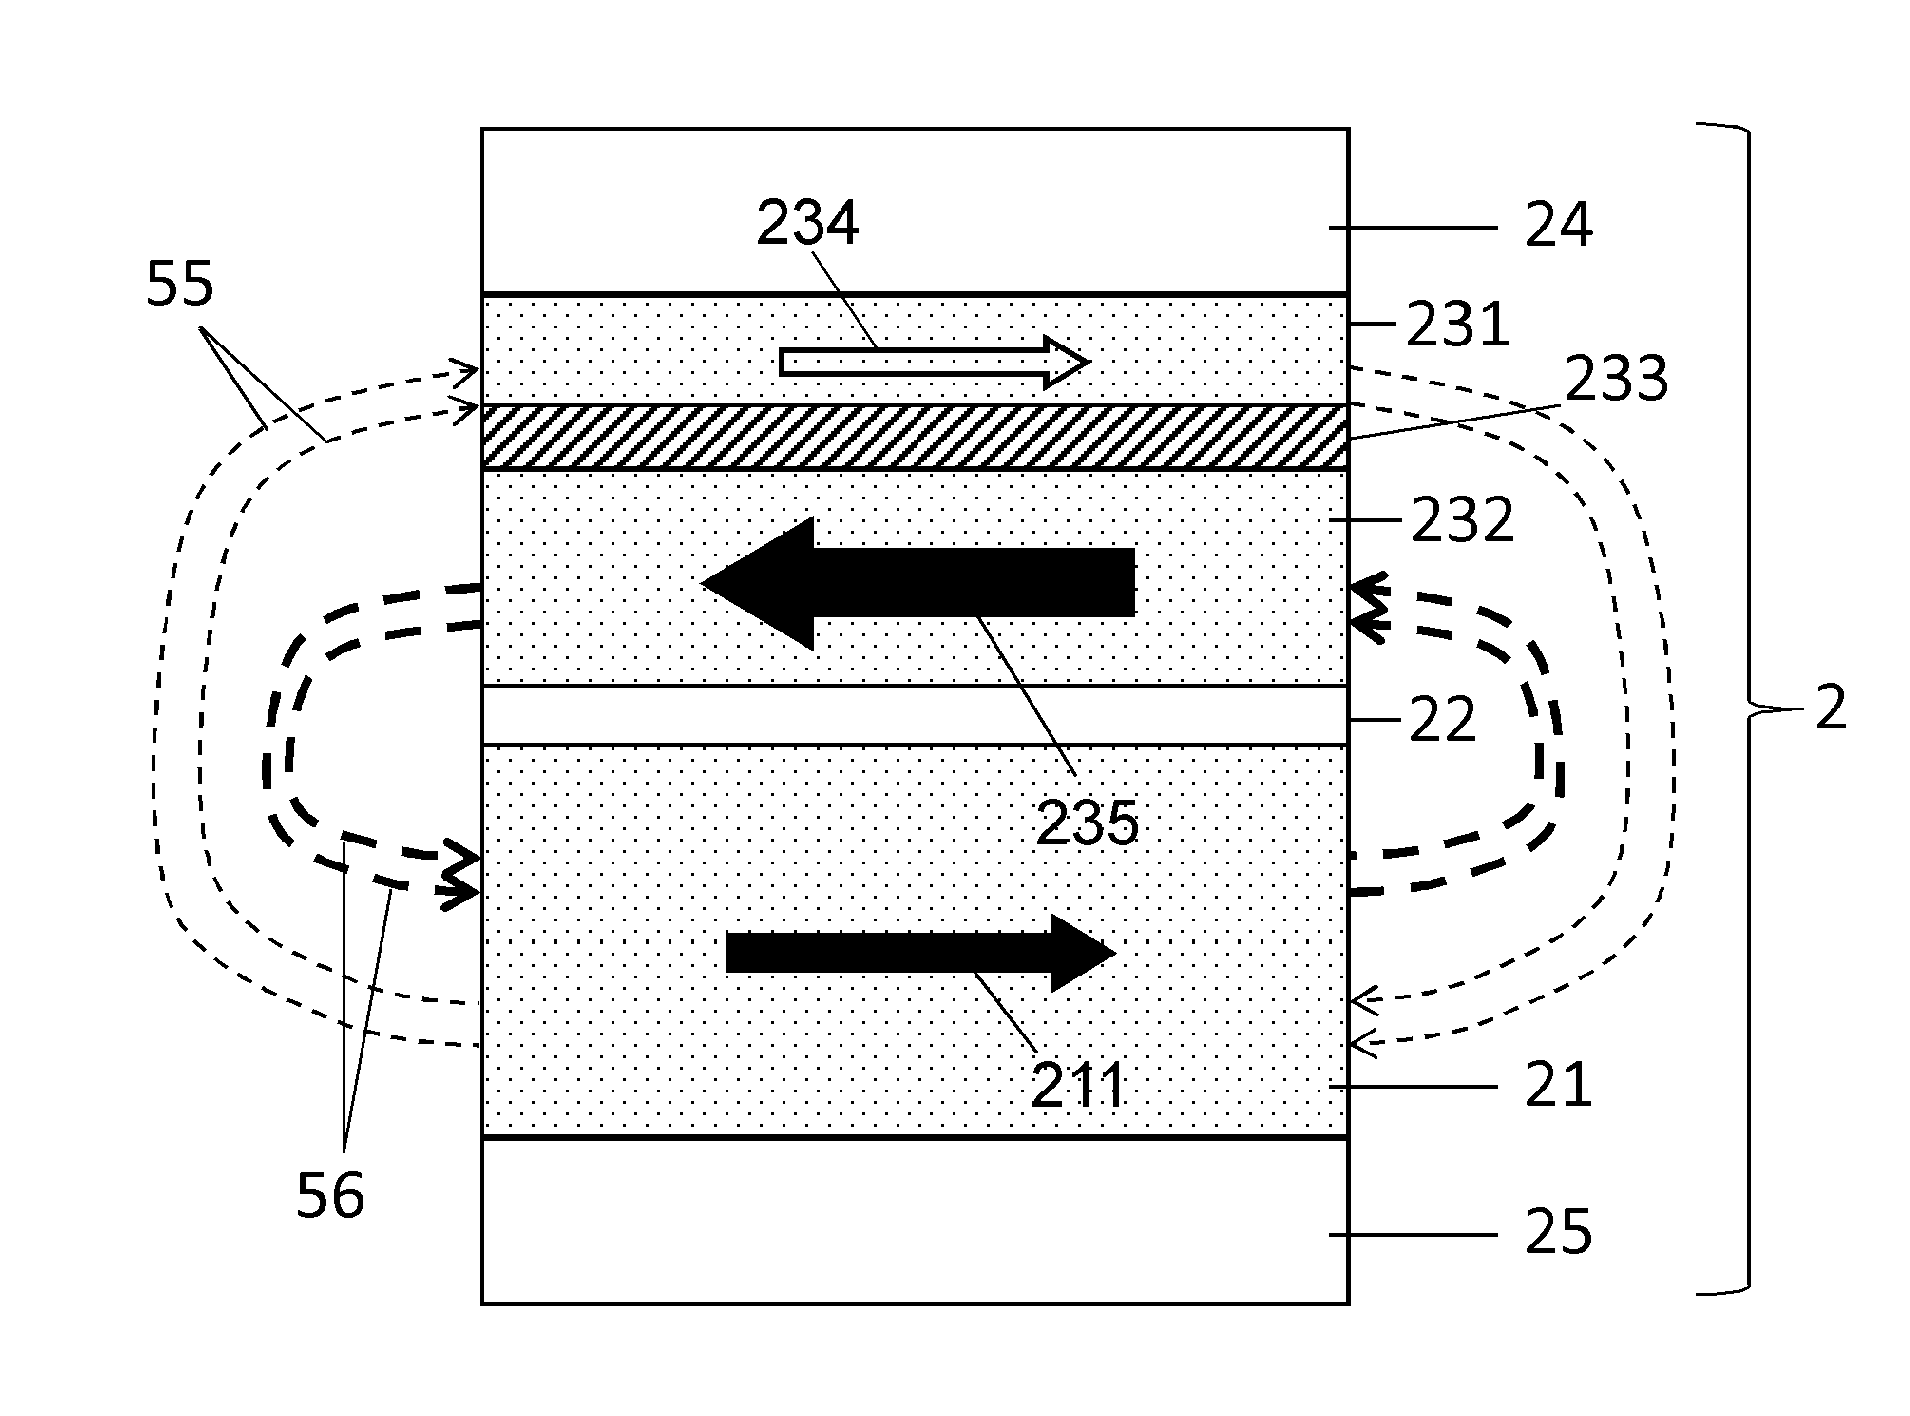 Magnetic random access memory (mram) cell and method for reading the mram cell using a self-referenced read operation